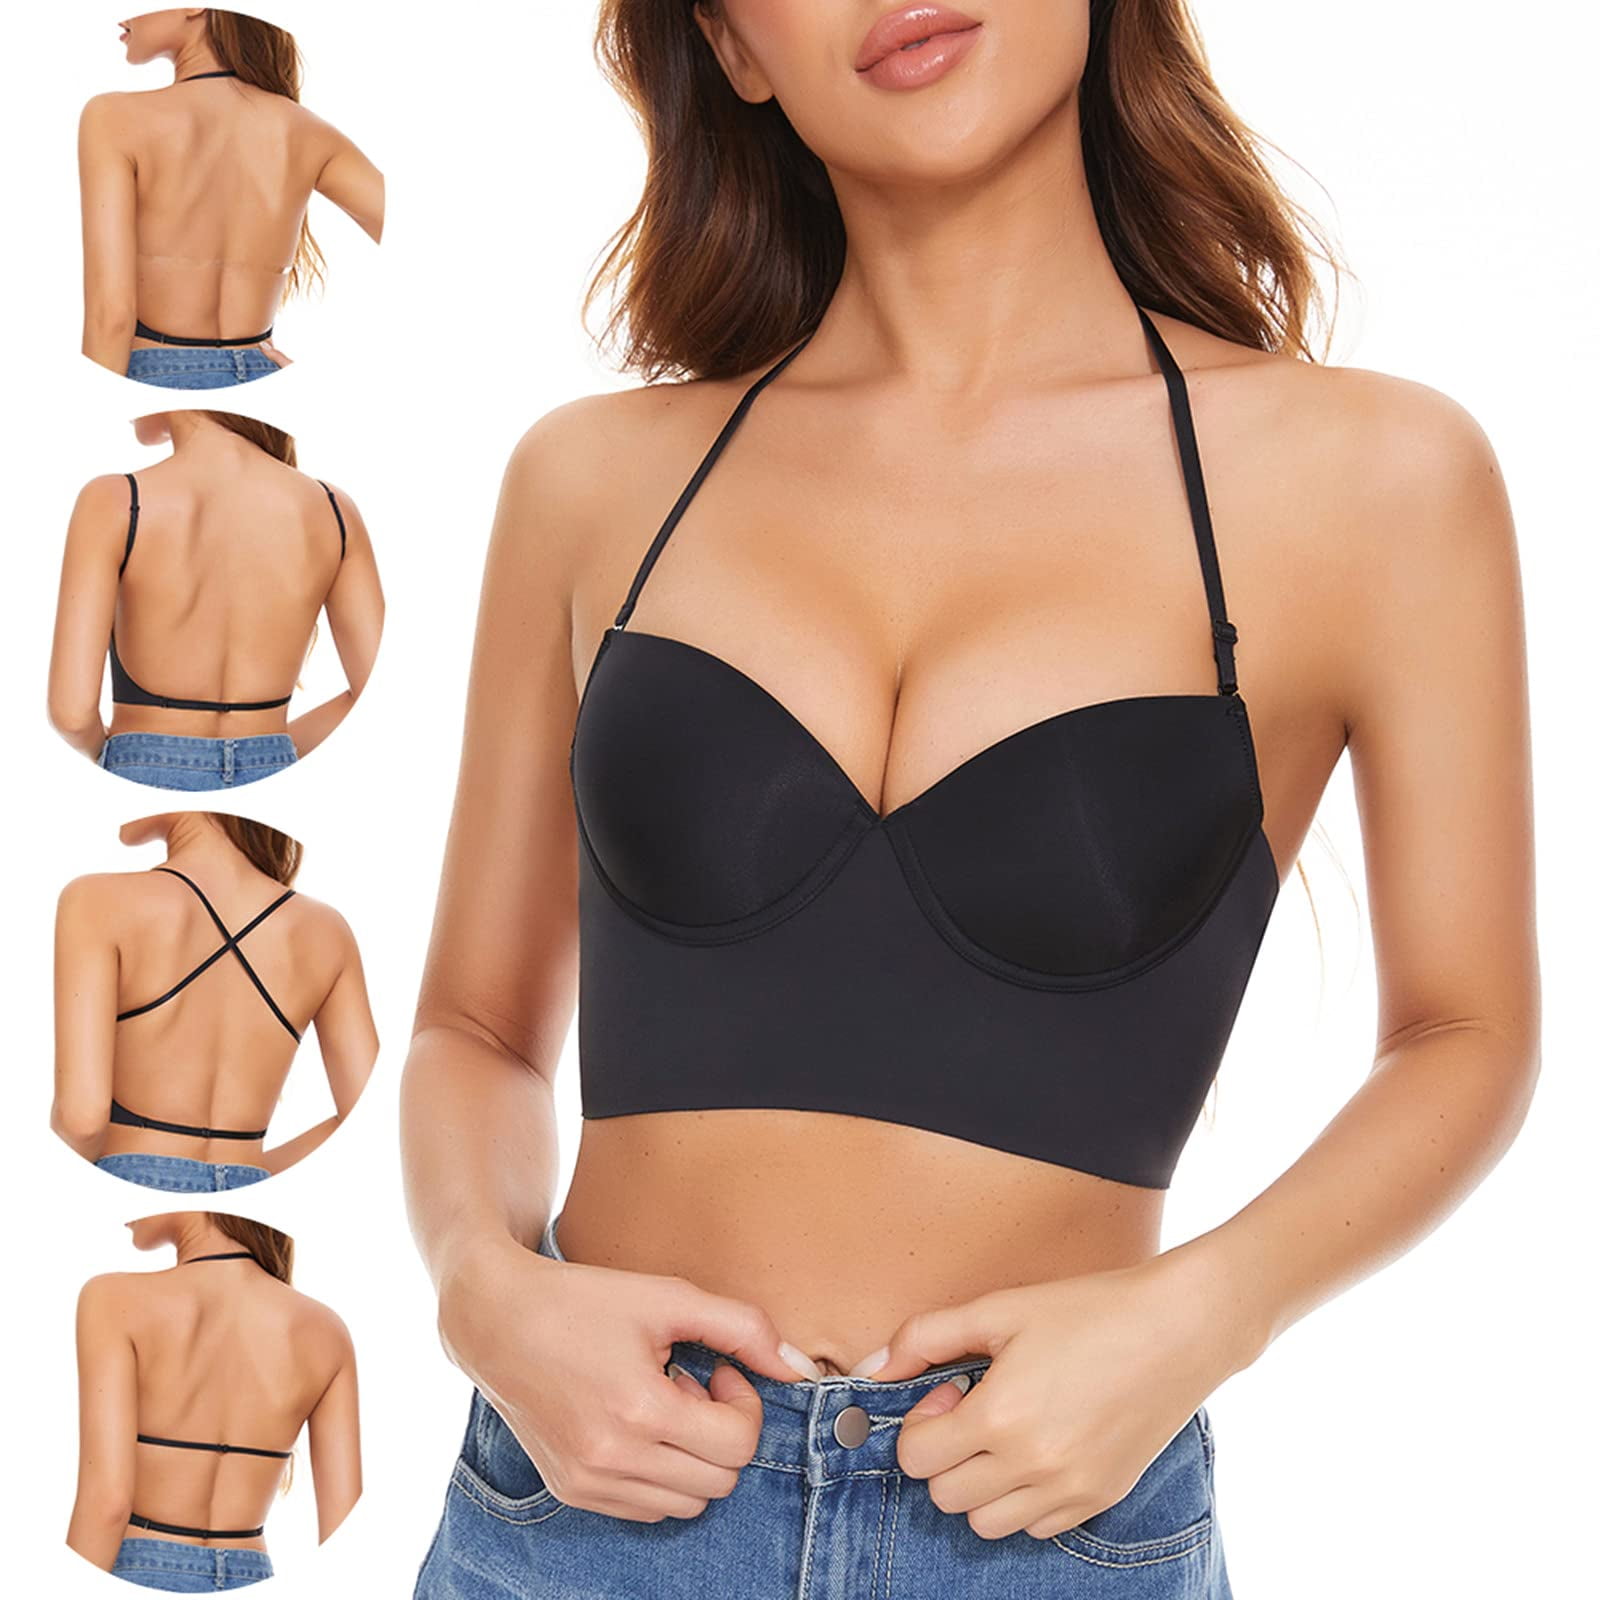 Backless Bra For Women,Sexy Deep V Bra with Low Back,Low Neck